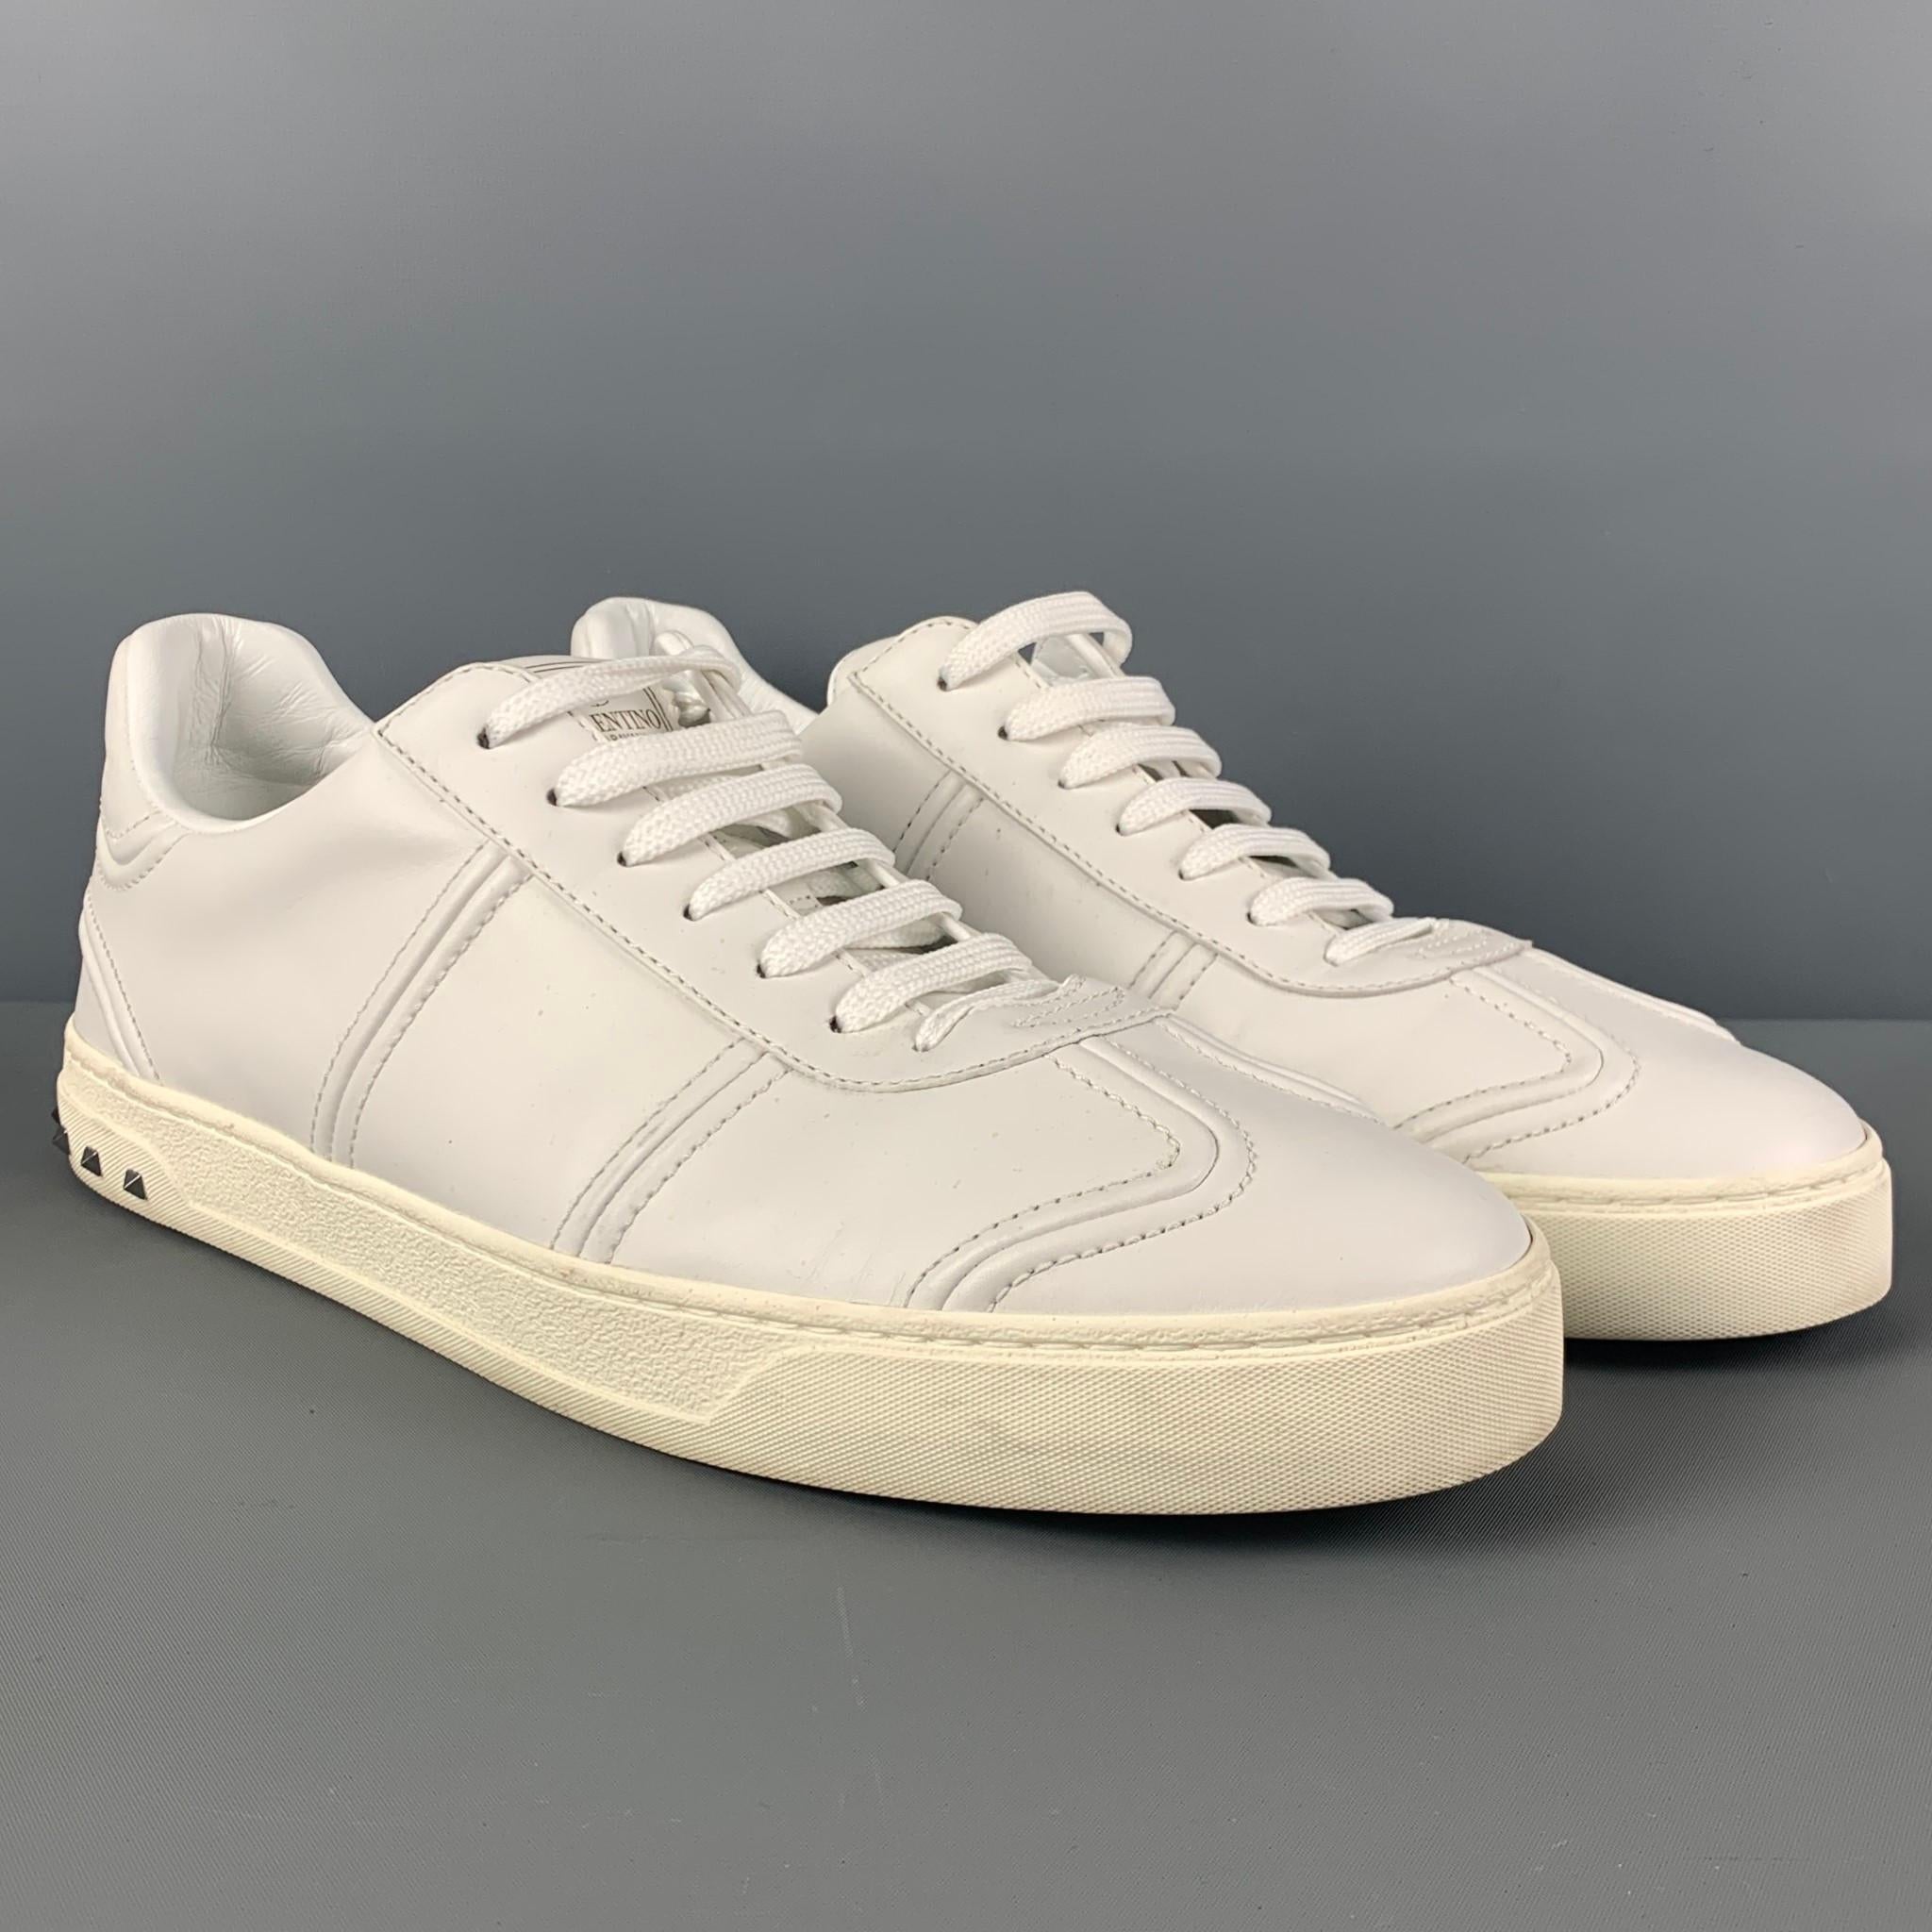 VALENTINO sneakers comes in a white leather featuring a low-top style, silver tone studs, and a lace up closure. Made in Italy. 

Very Good Pre-Owned Condition.
Marked: 45

Outsole: 12.5 in. x 4 in.